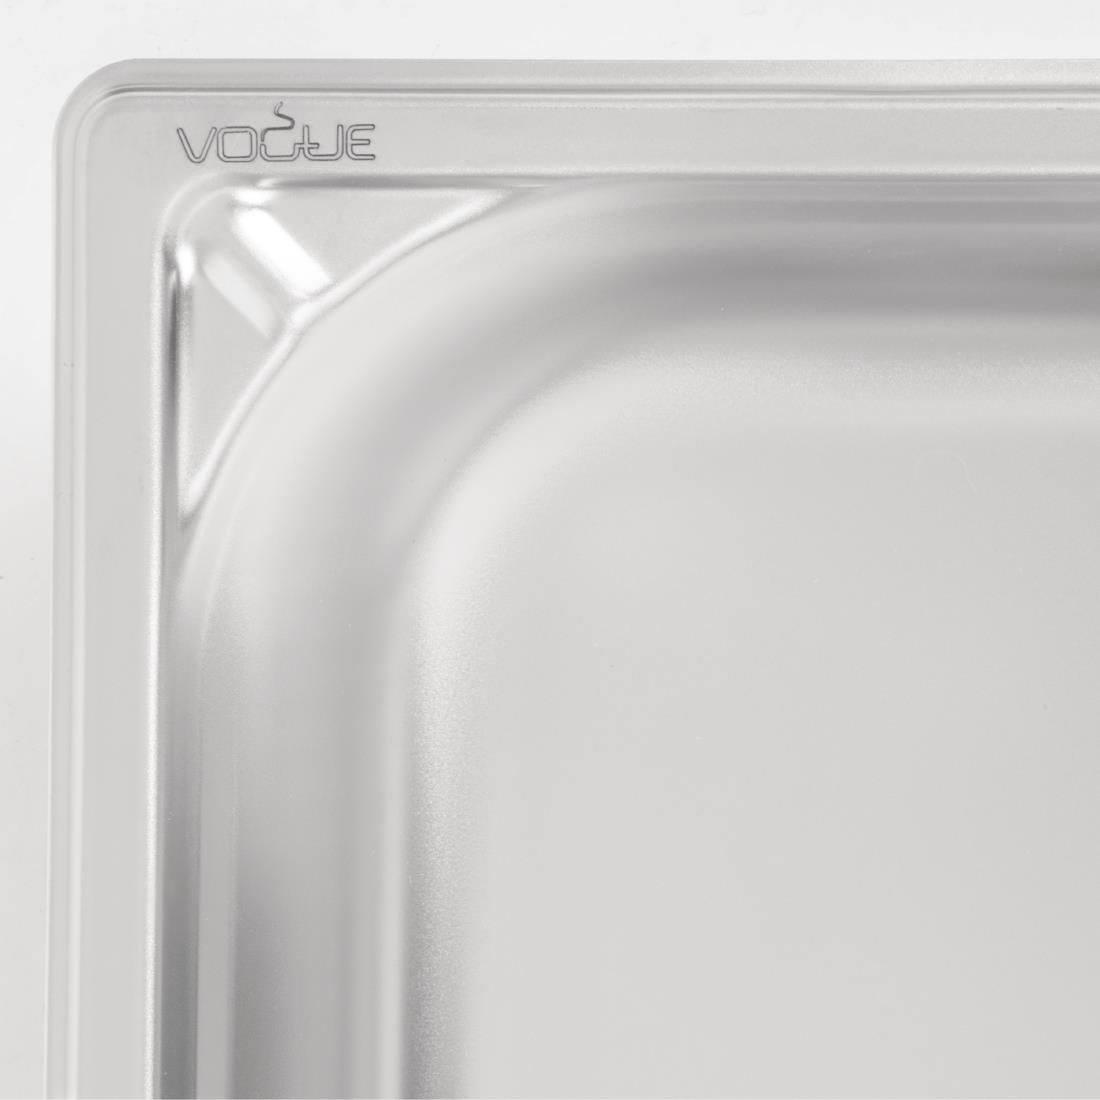 DW442 Vogue Heavy Duty Stainless Steel 1/3 Gastronorm Pan 65mm